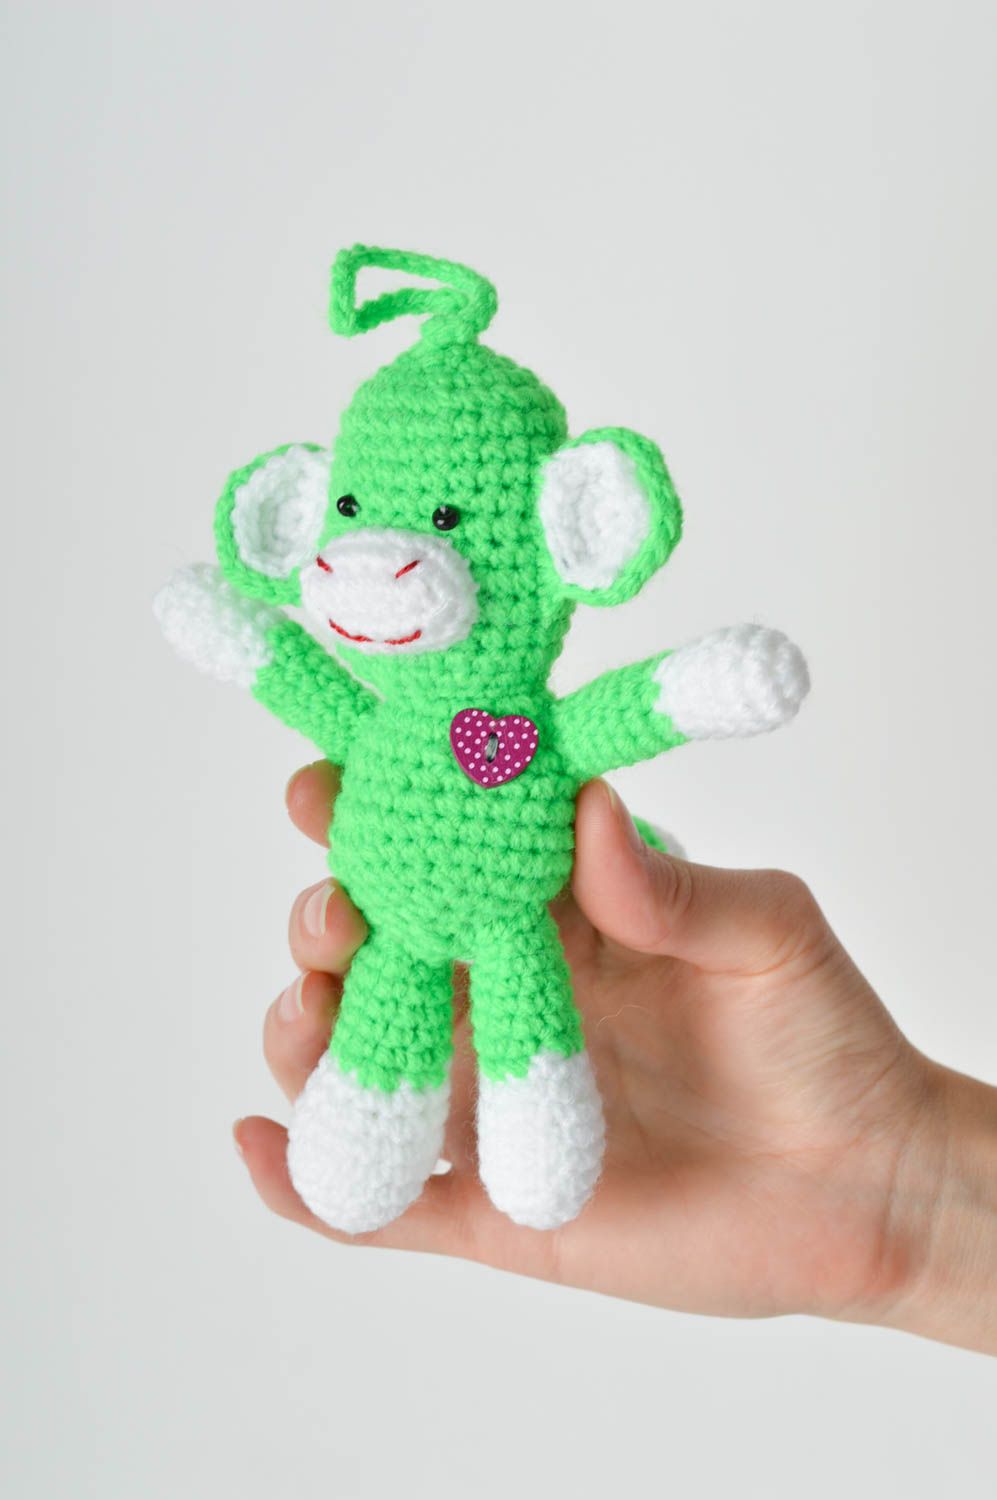 Handmade cute crocheted toy interior decor hand-crocheted toy for children photo 5